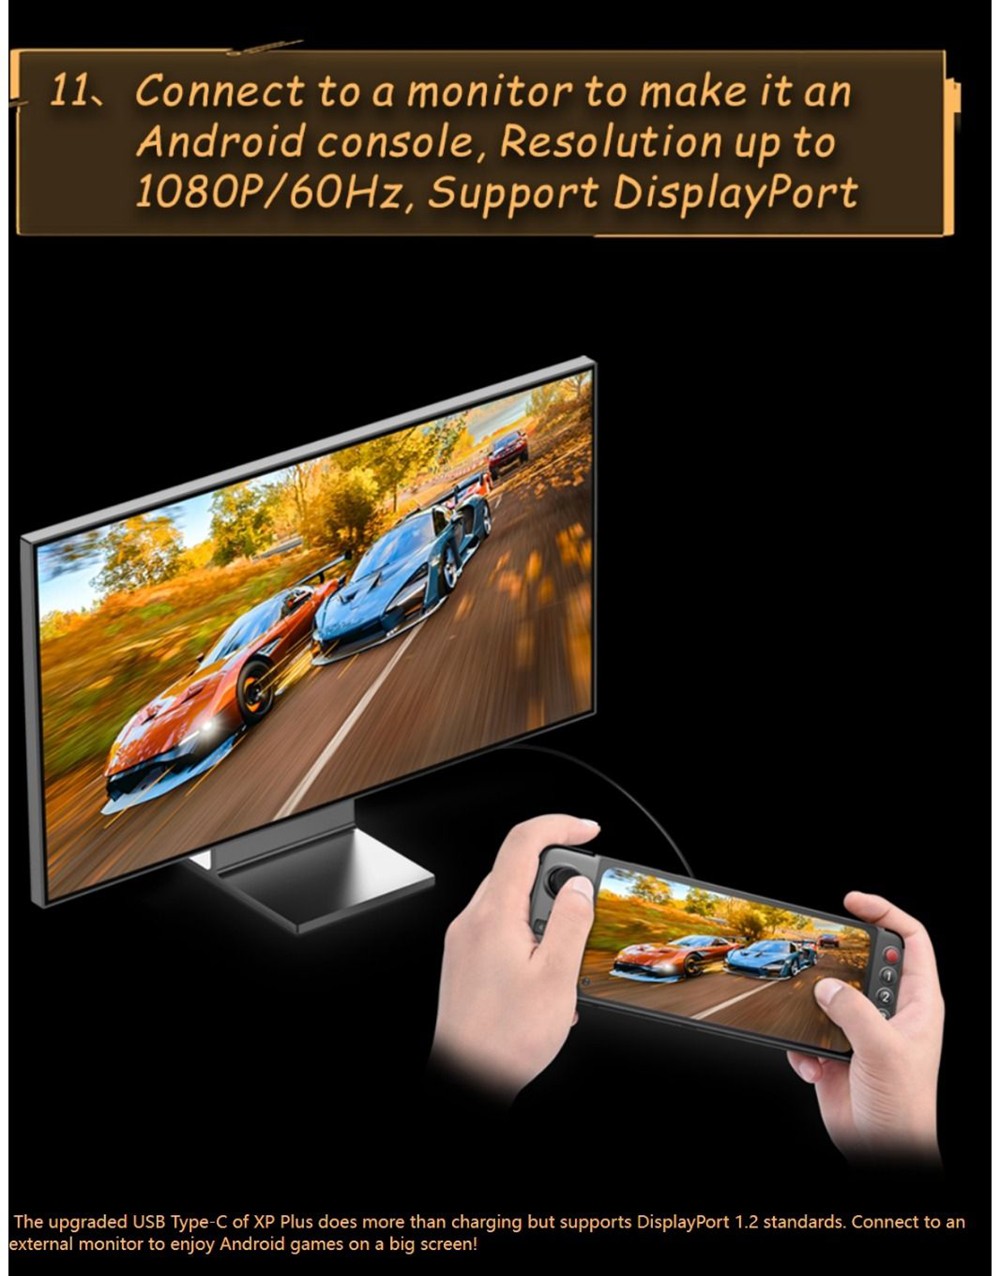 GPD XP Plus Game Console 6.81-inch Screen Android 11 Gamepad Tablet PC 6GB/256GB 1080*2400 Game Player - EU Version